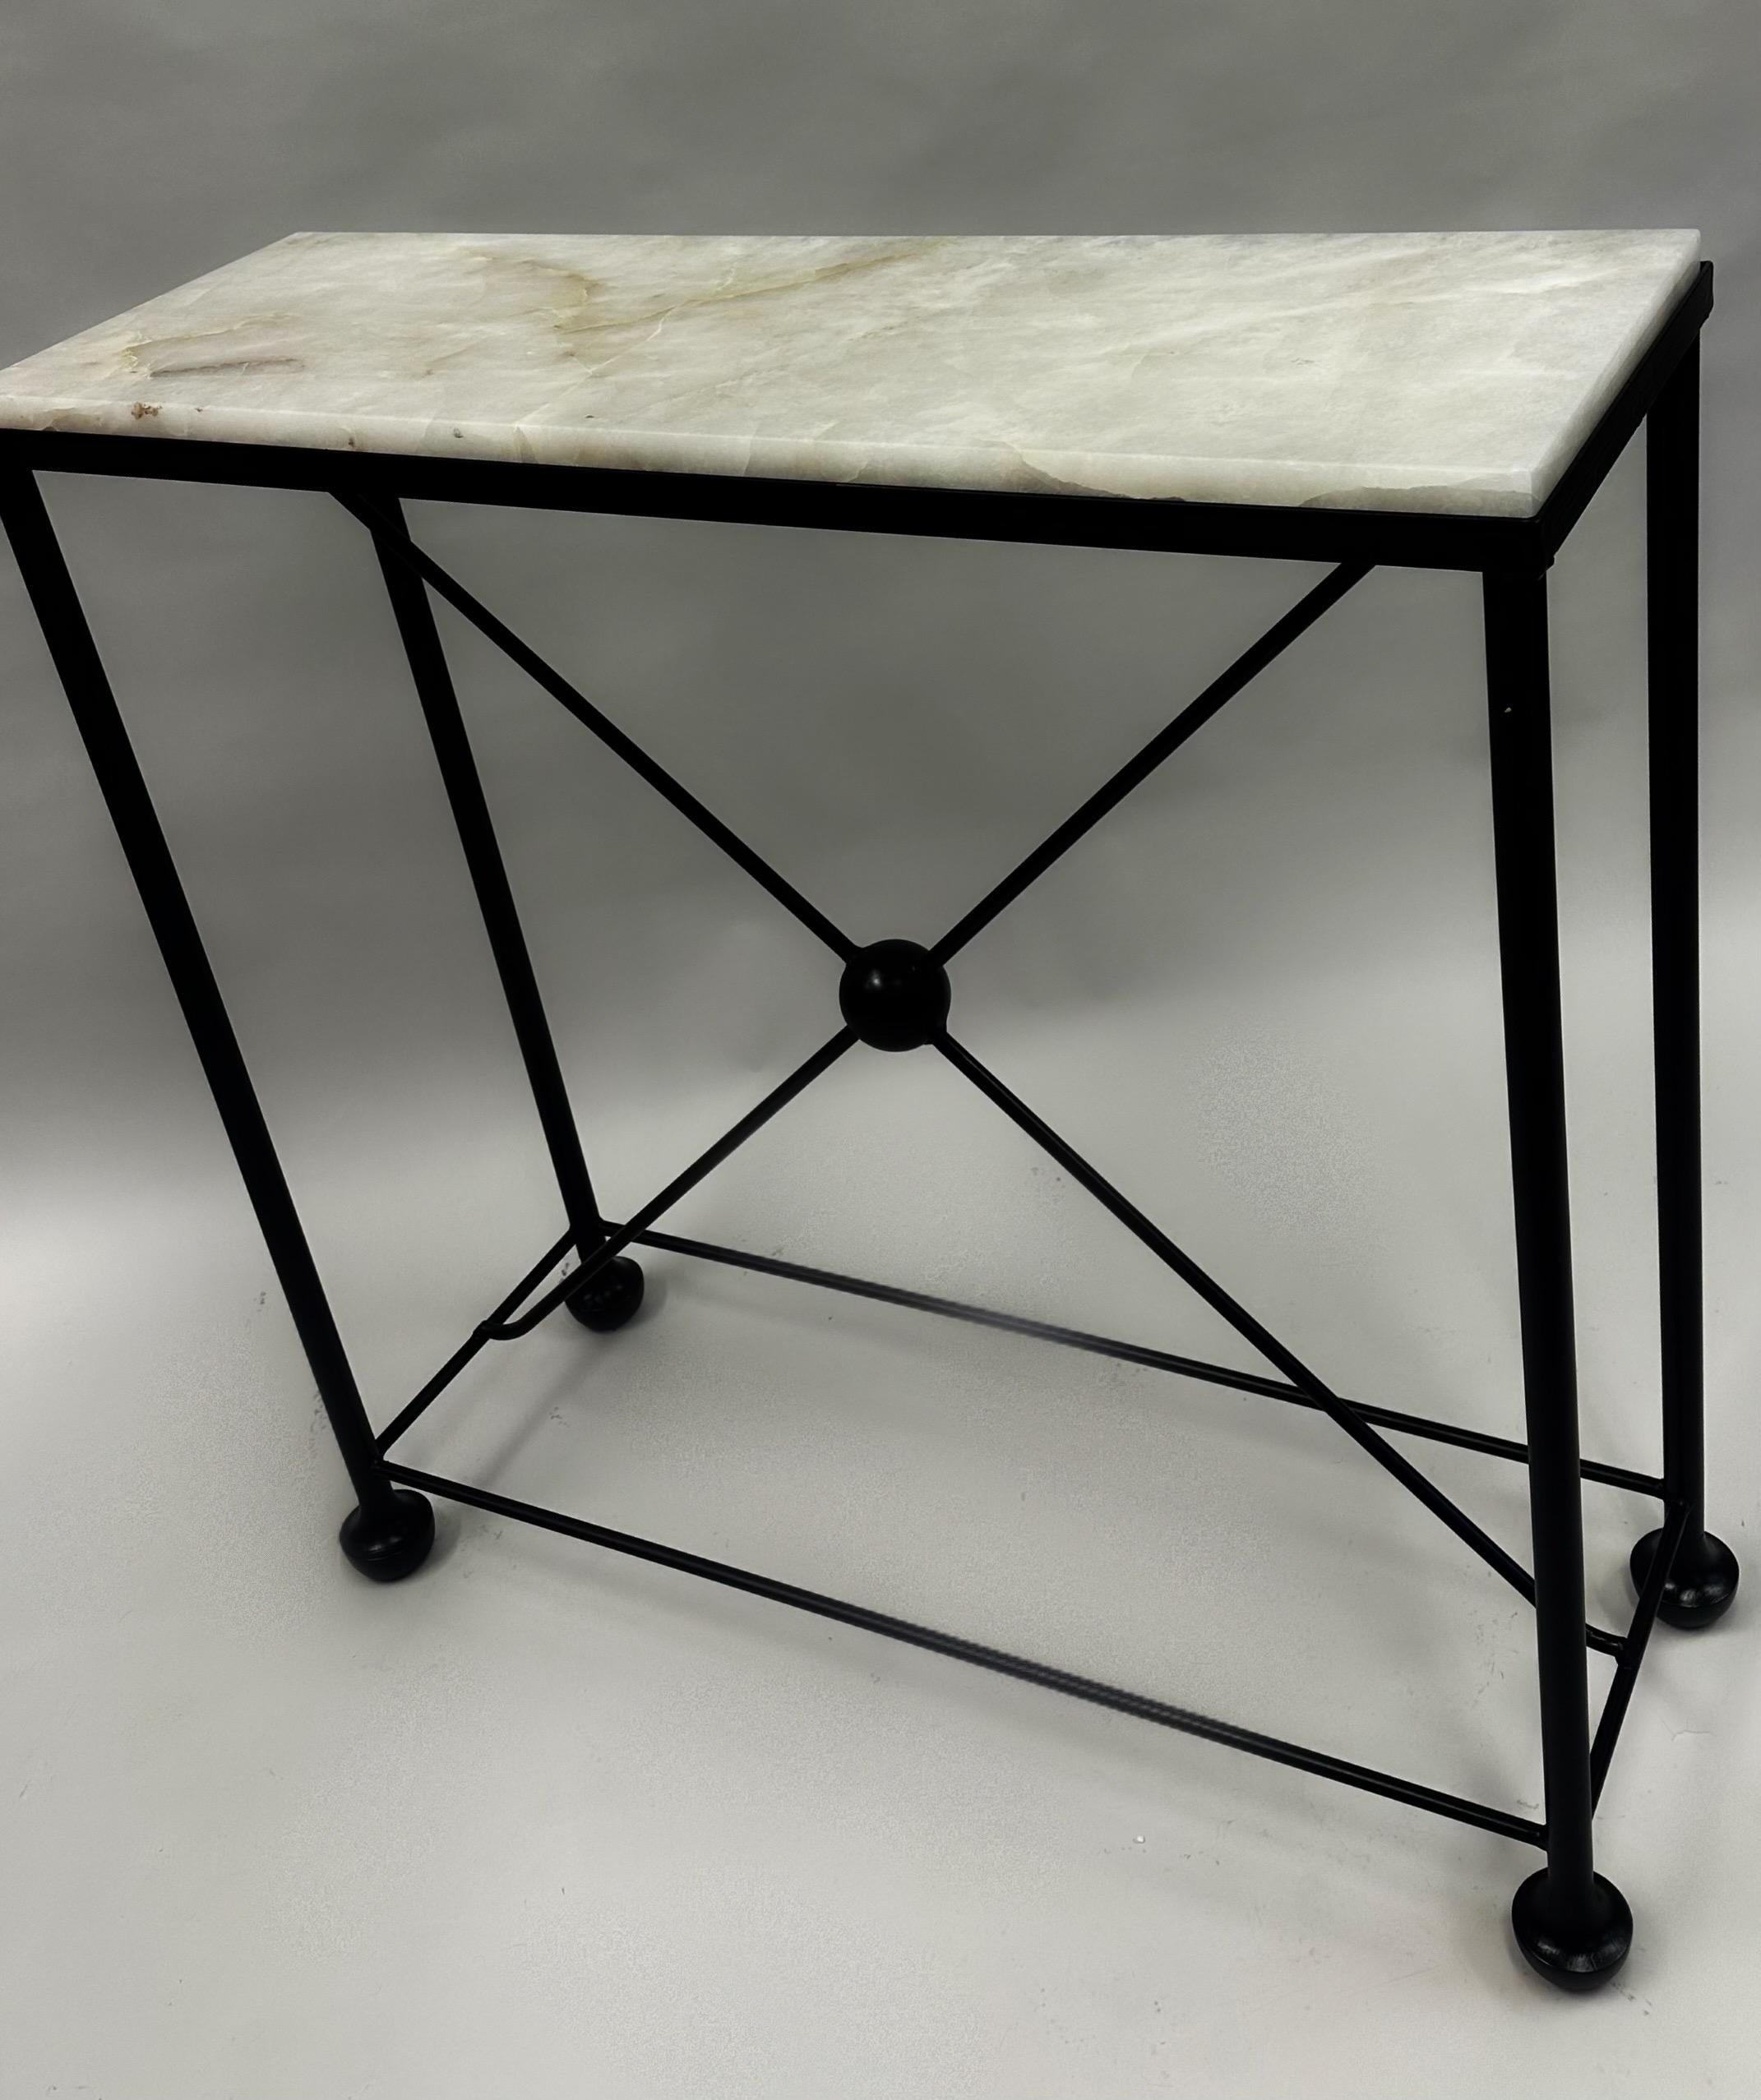 2 French Modern Neoclassical Rock Crystal & Iron Consoles, Jean-Michel Frank For Sale 2